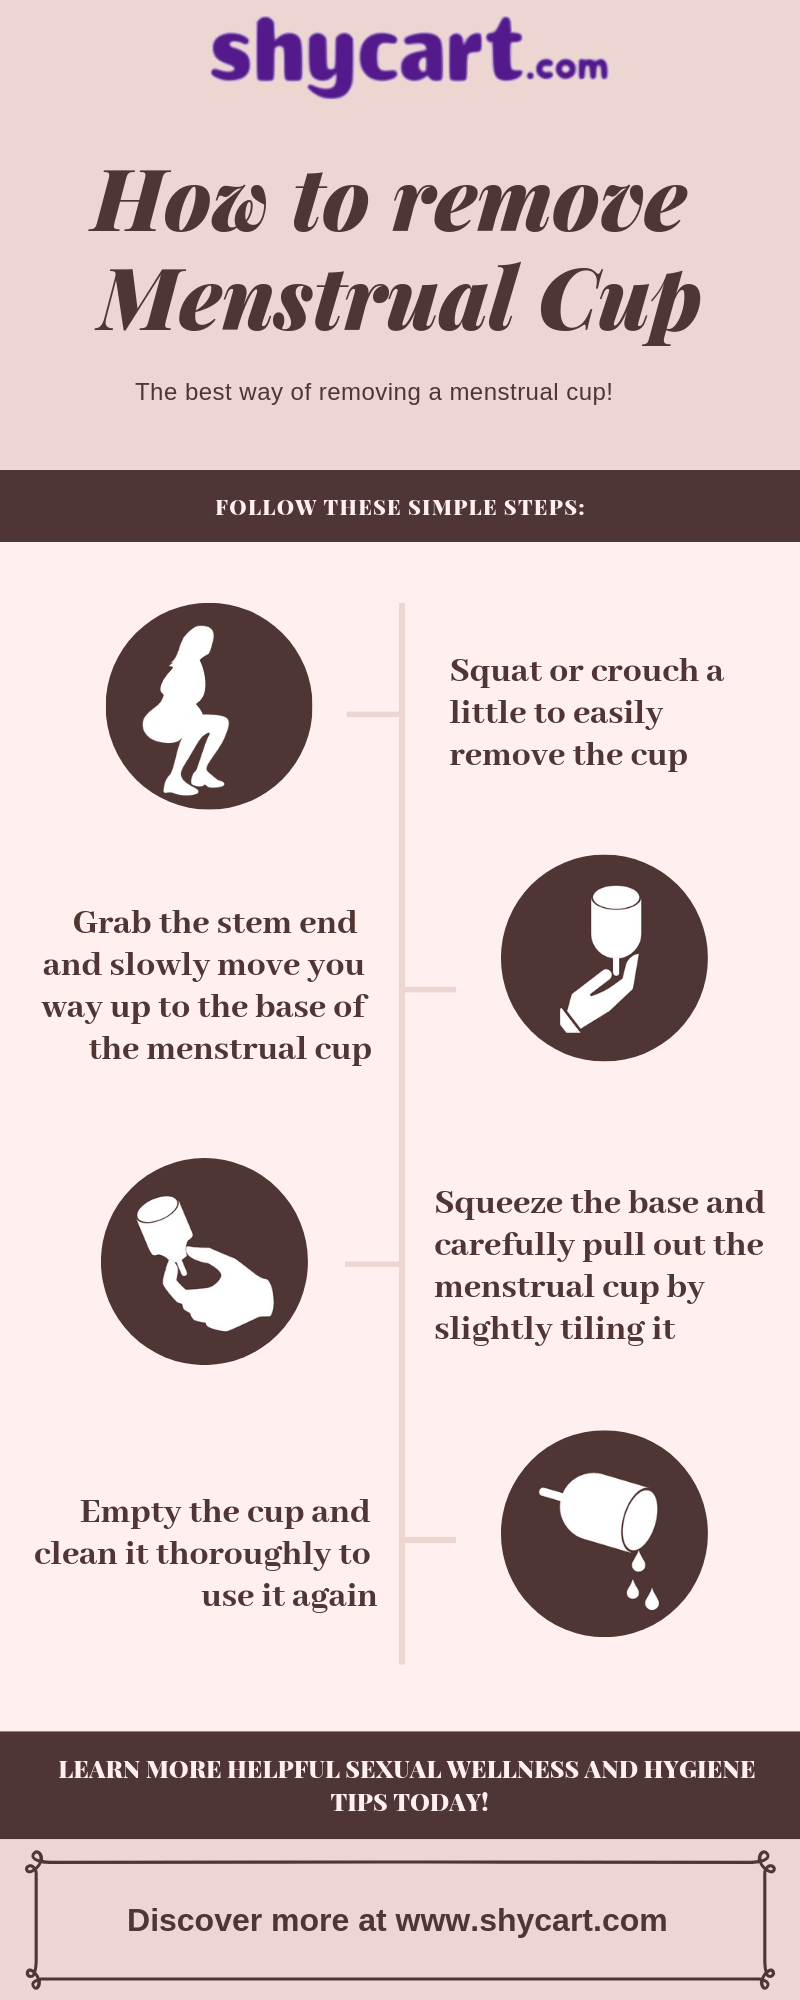 How to remove menstrual cup in simple steps